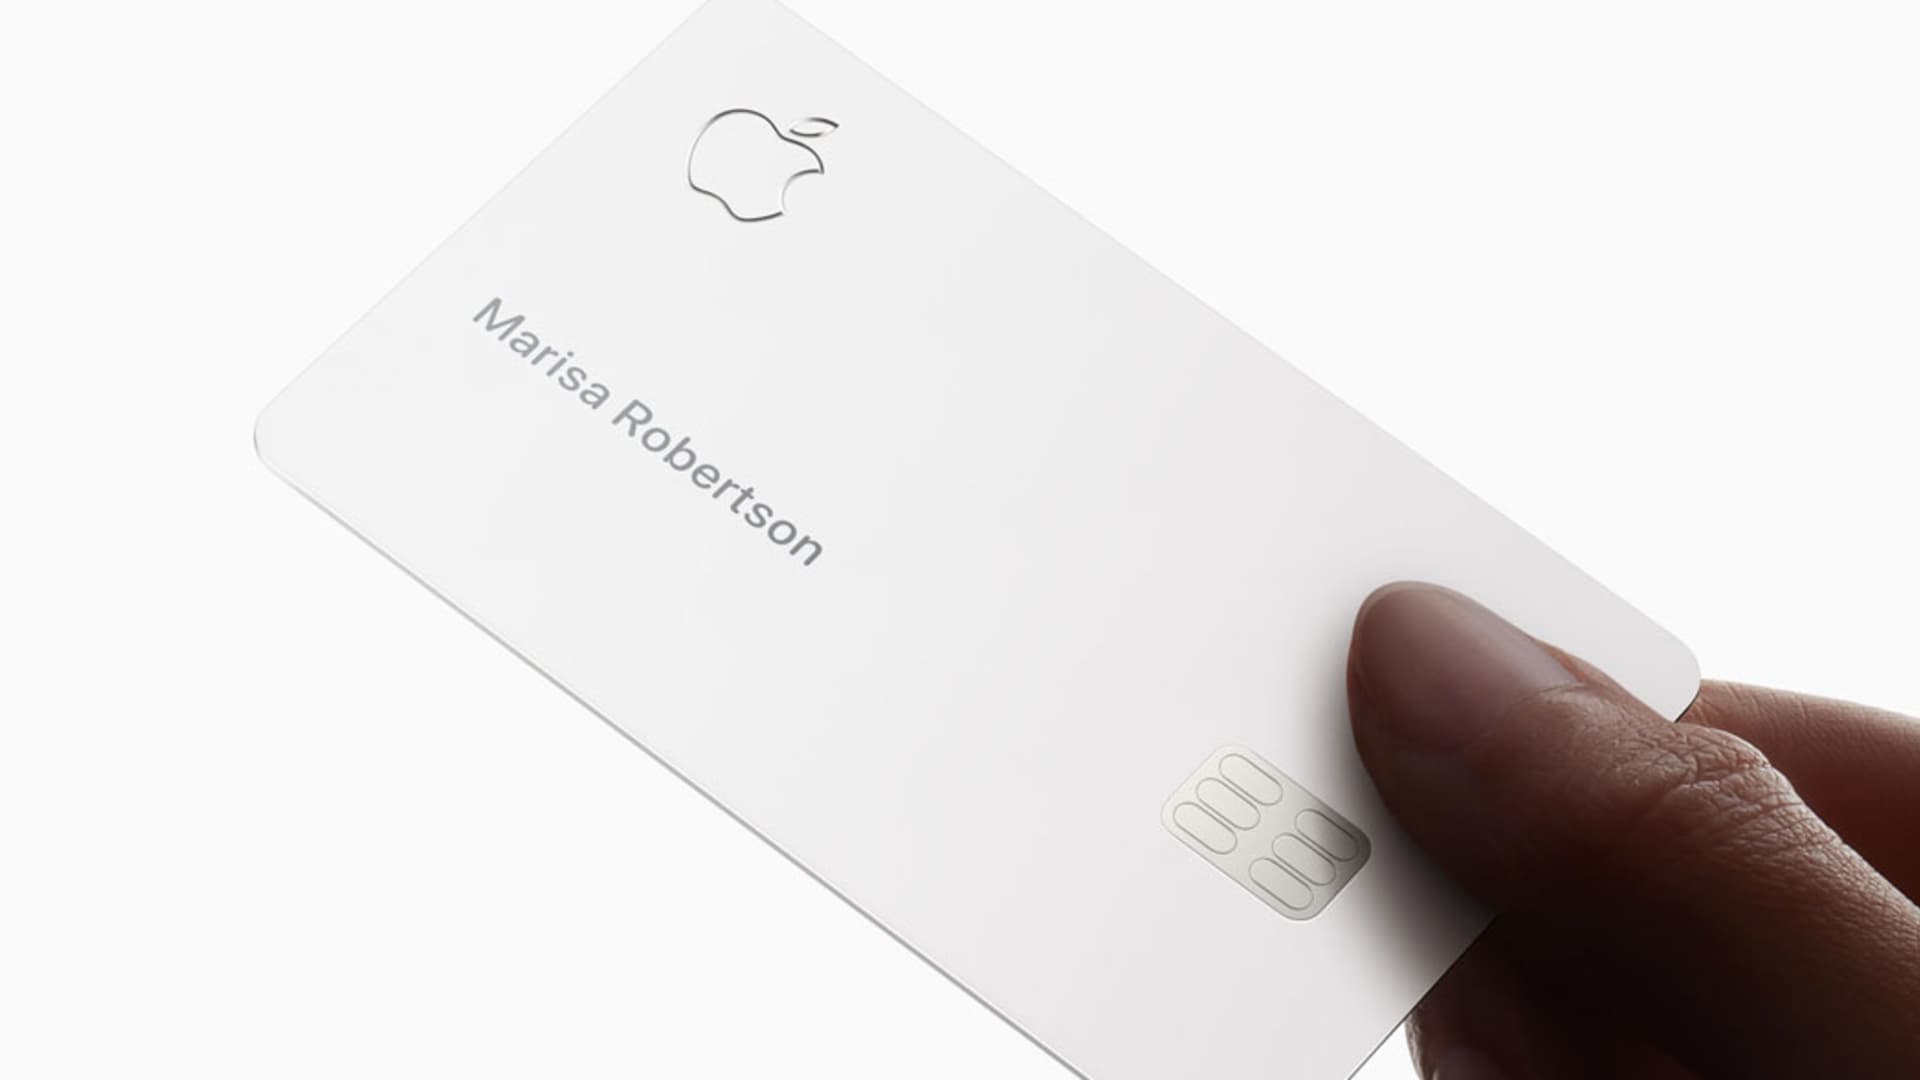 Apple Credit Card 2023 Review: Fees, Payment and Security